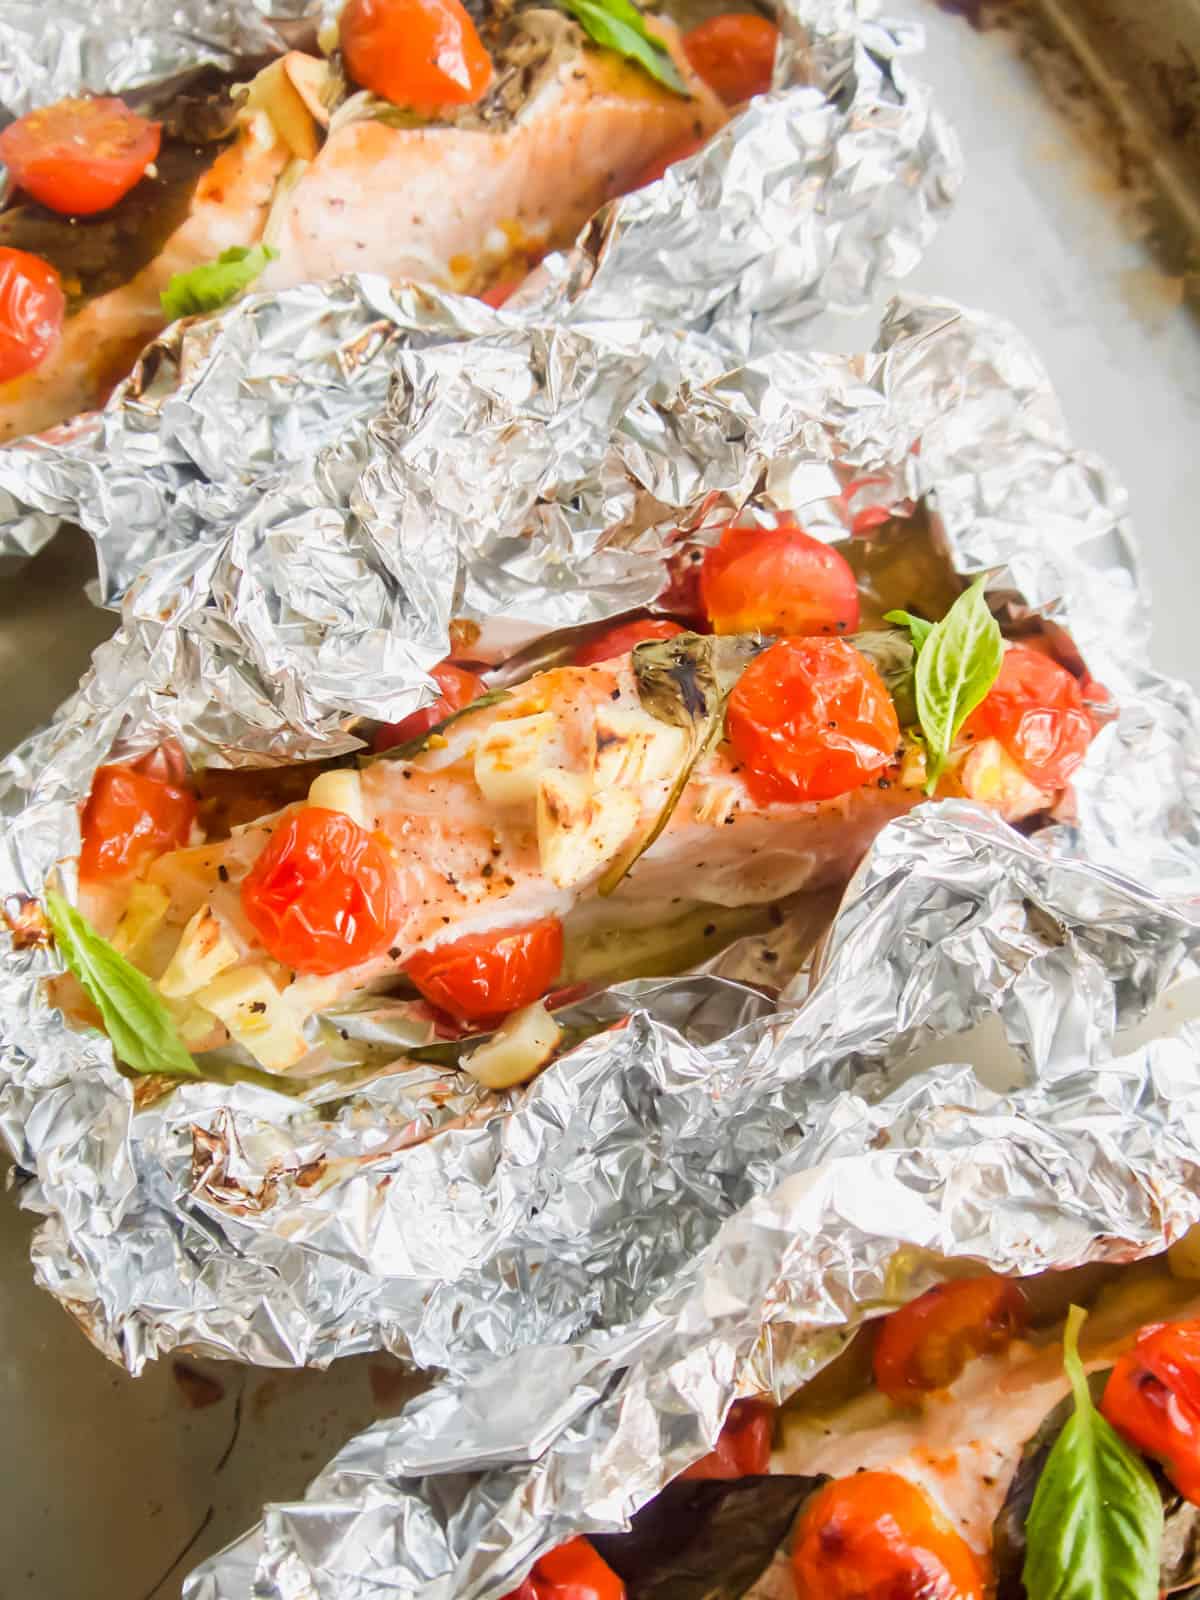 Baked salmon with tomatoes in foil.